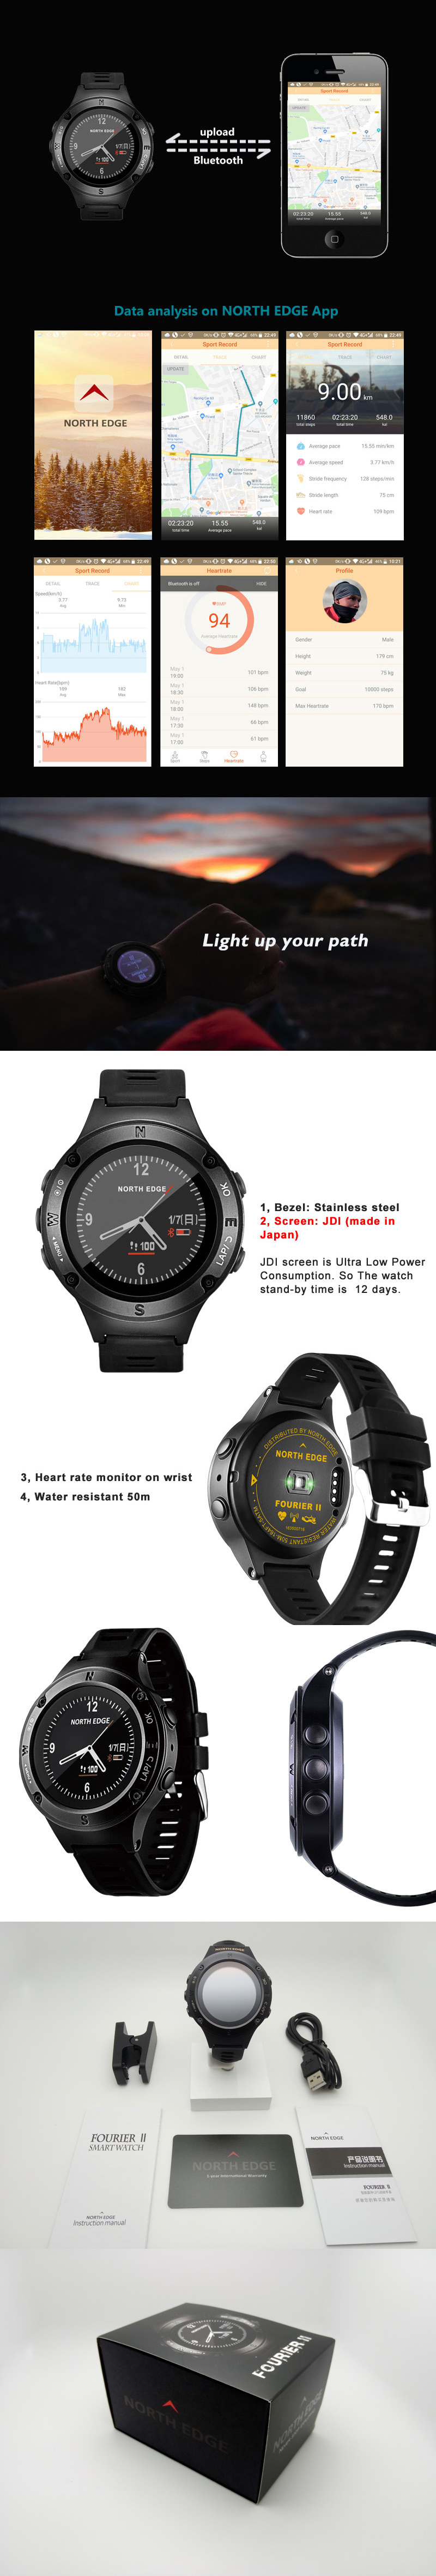 NORTH-EDGE-Fourier2-Outdoor-Smart-Watch-HR-Monitor-Bluetooth-Compass-Altimeter-Thermometer-GPS-Watch-1293543